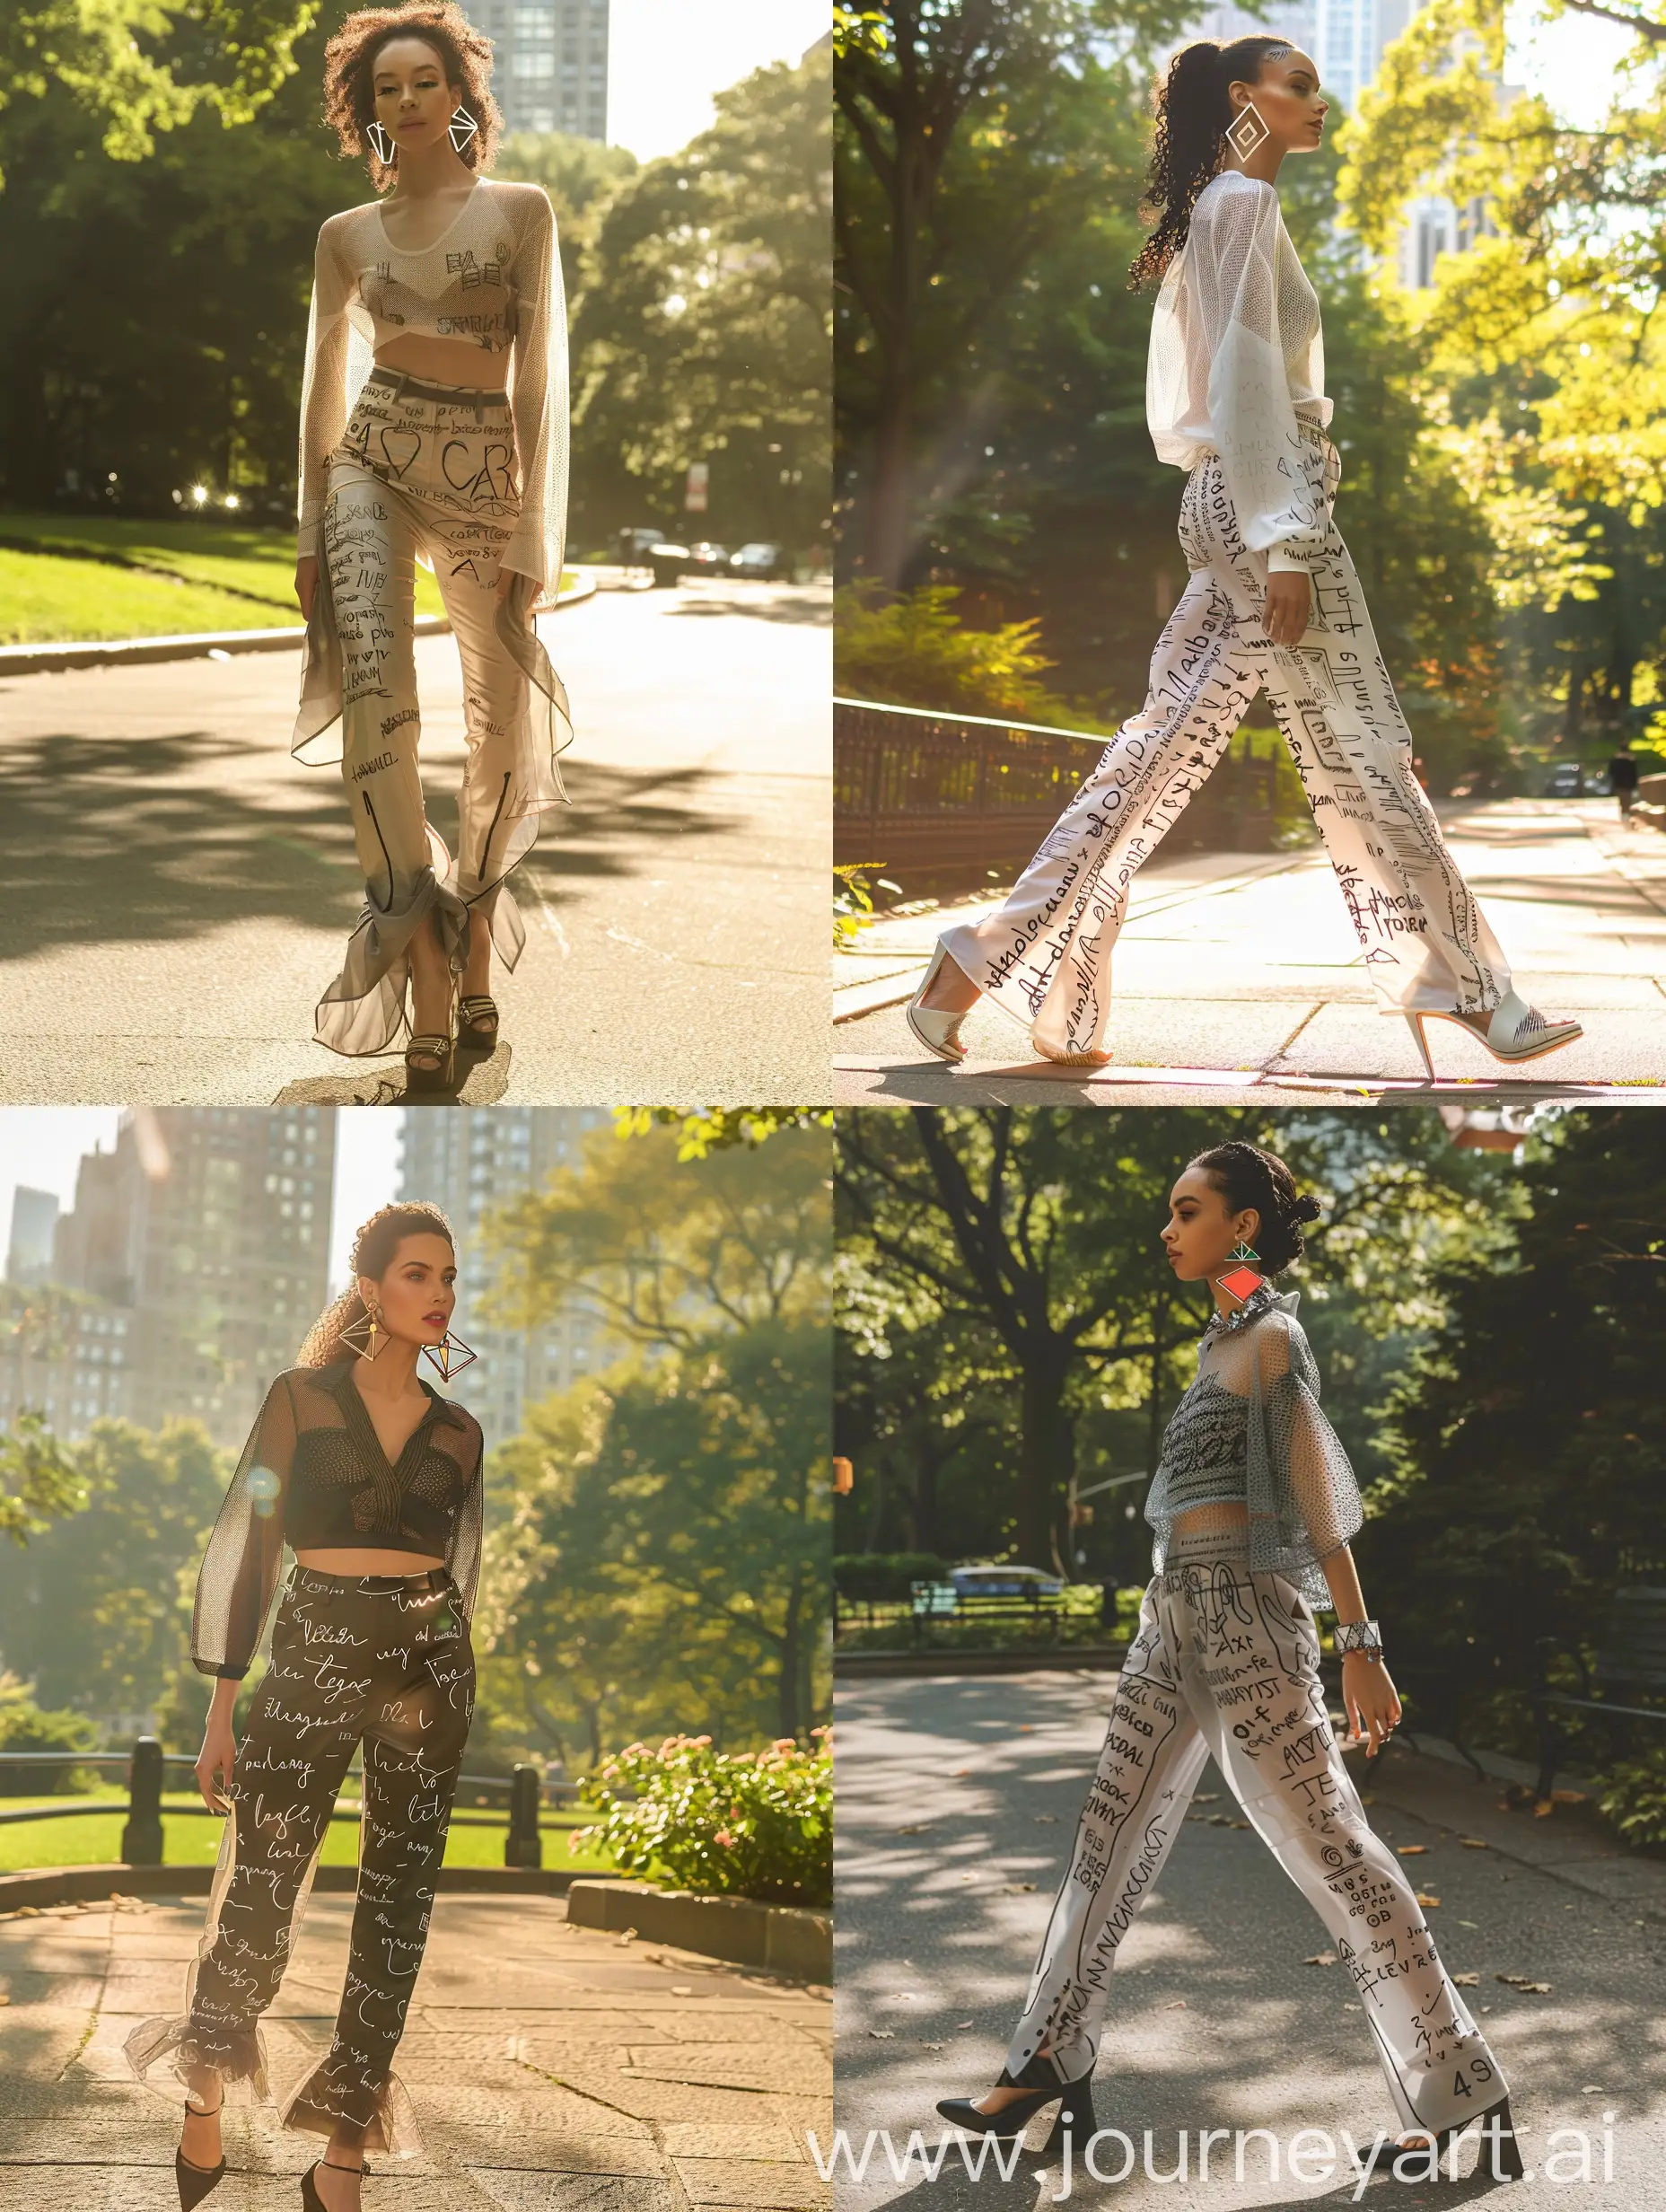 Urban-Fashion-Model-Walking-in-Central-Park-on-a-Sunny-Day